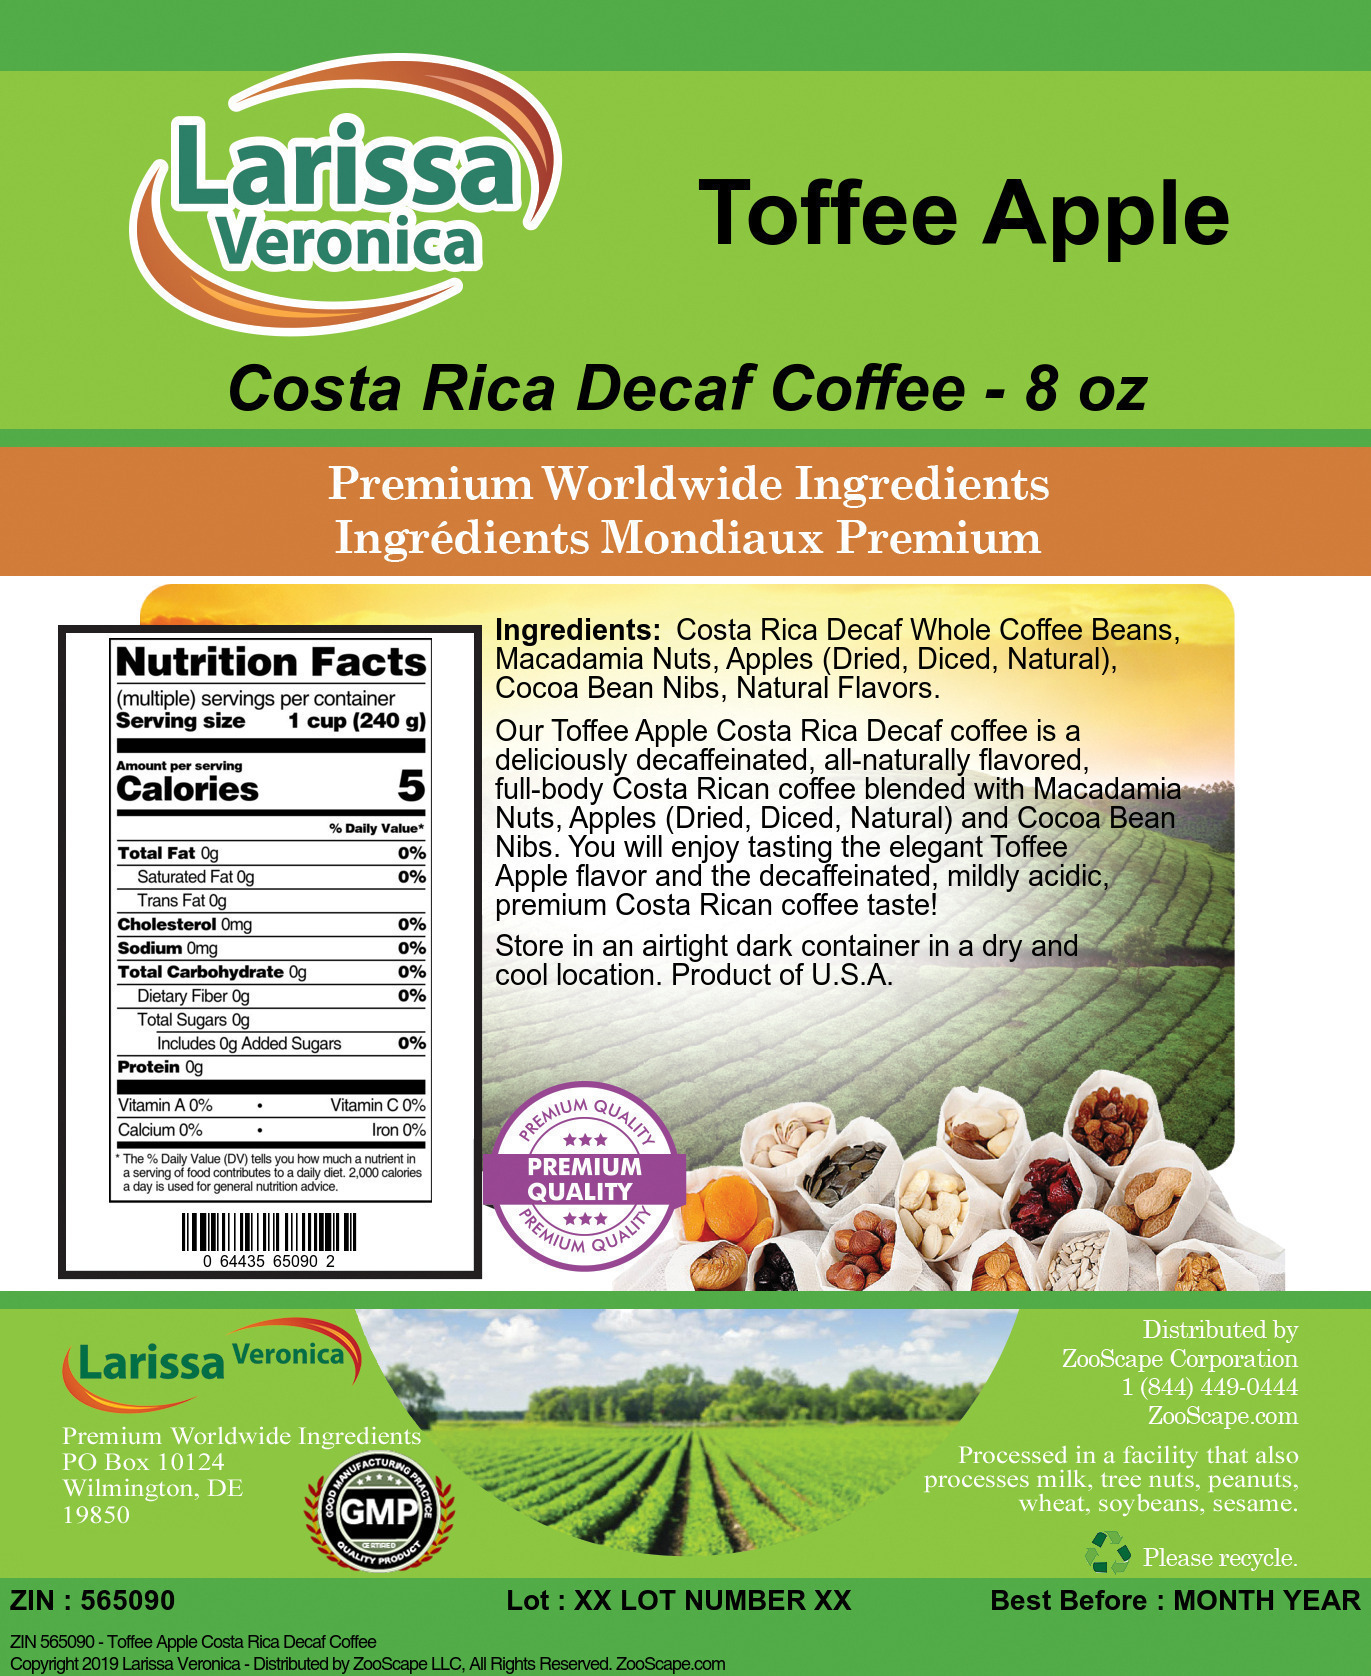 Toffee Apple Costa Rica Decaf Coffee - Label